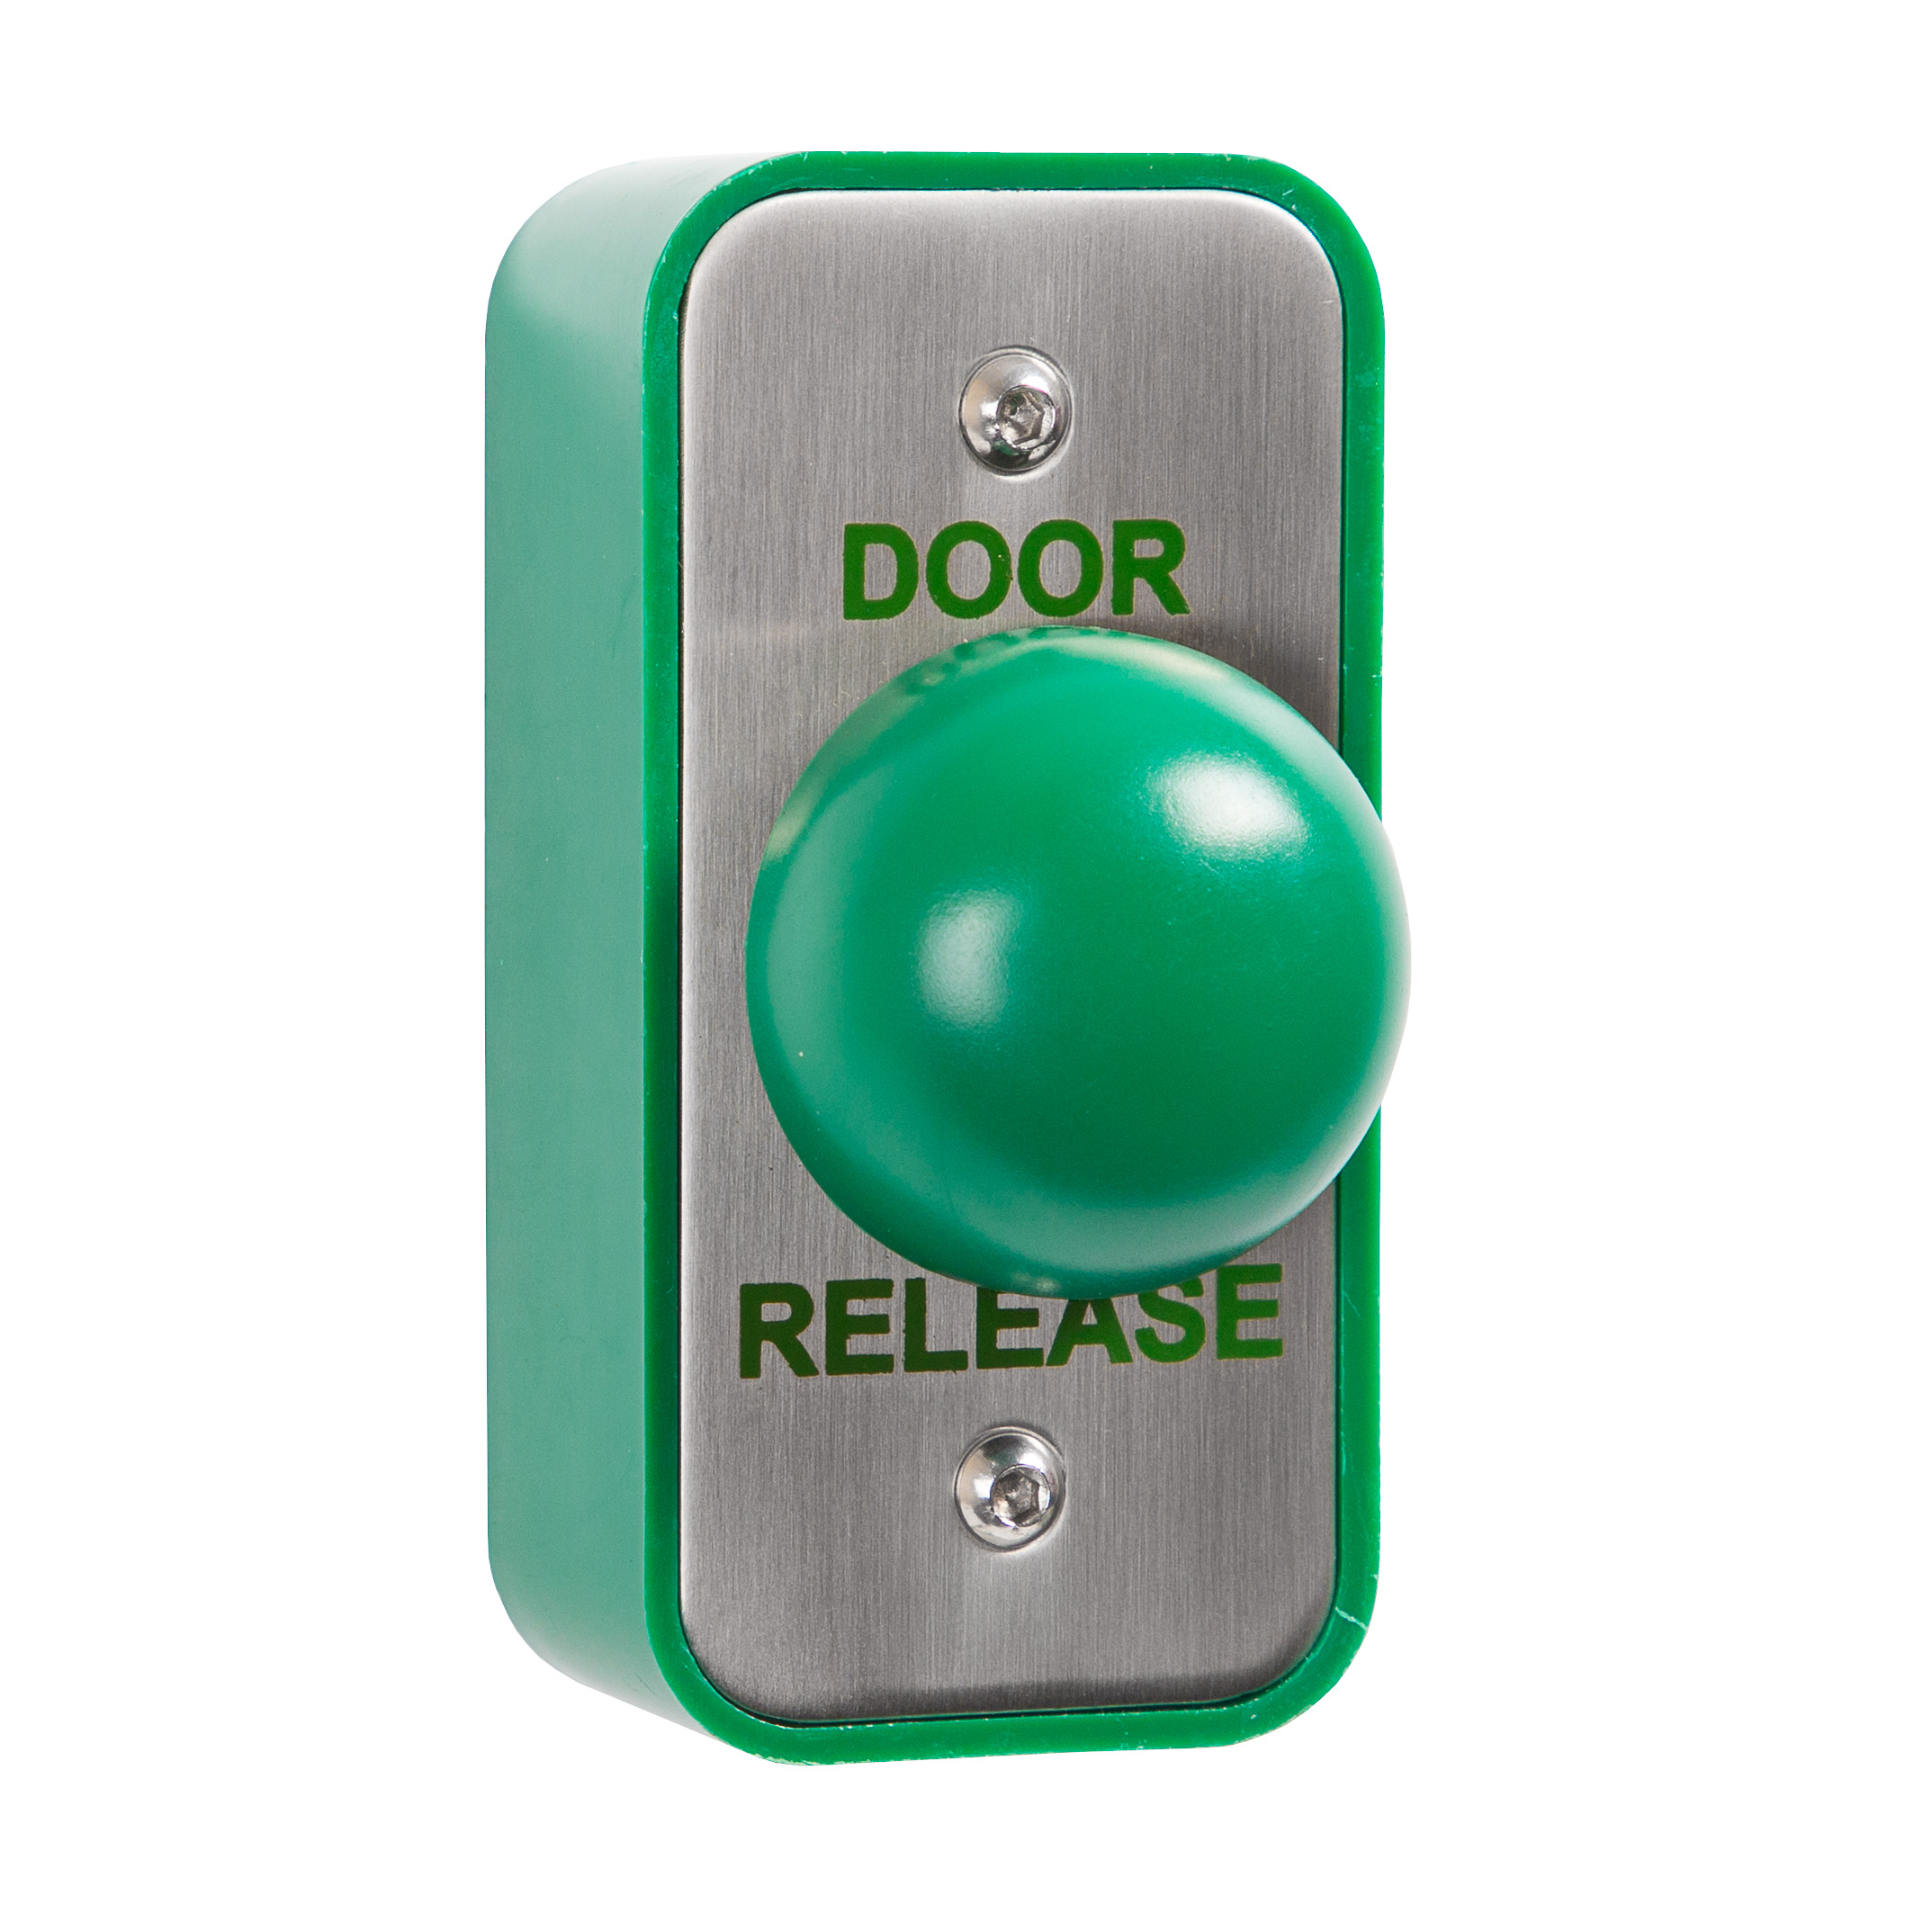 Dual Unit Green Domed Press to Exit and Emergency Door Release